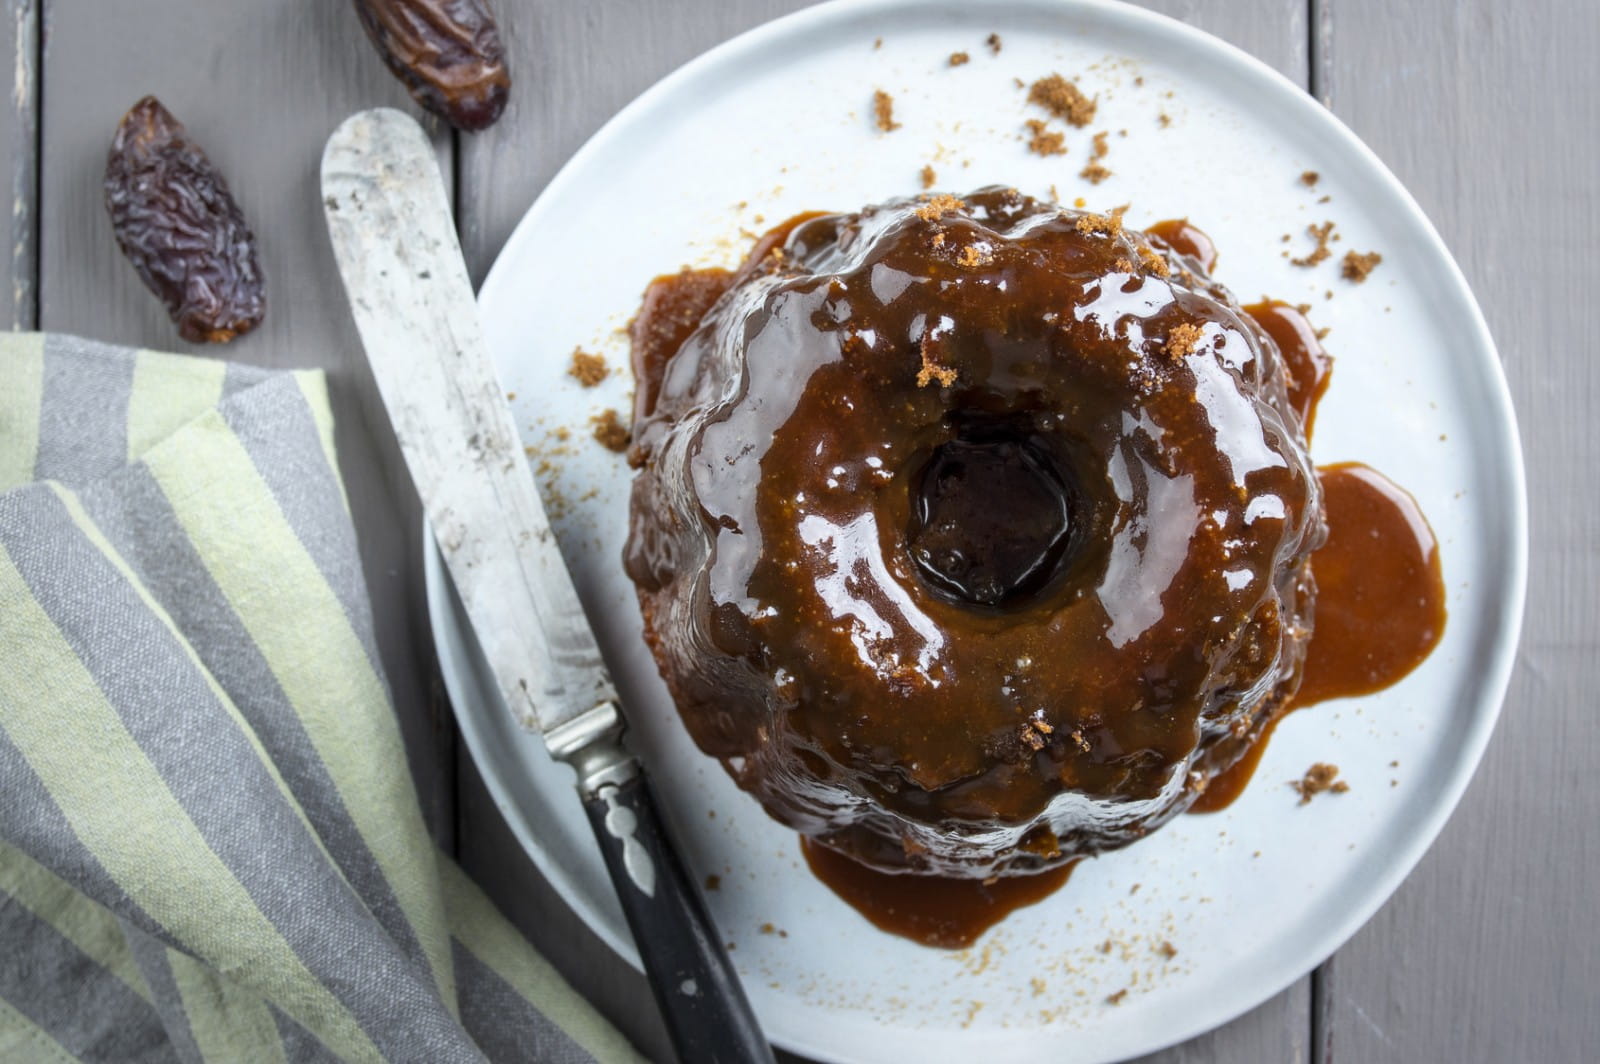 Best pairings with sticky toffee pudding